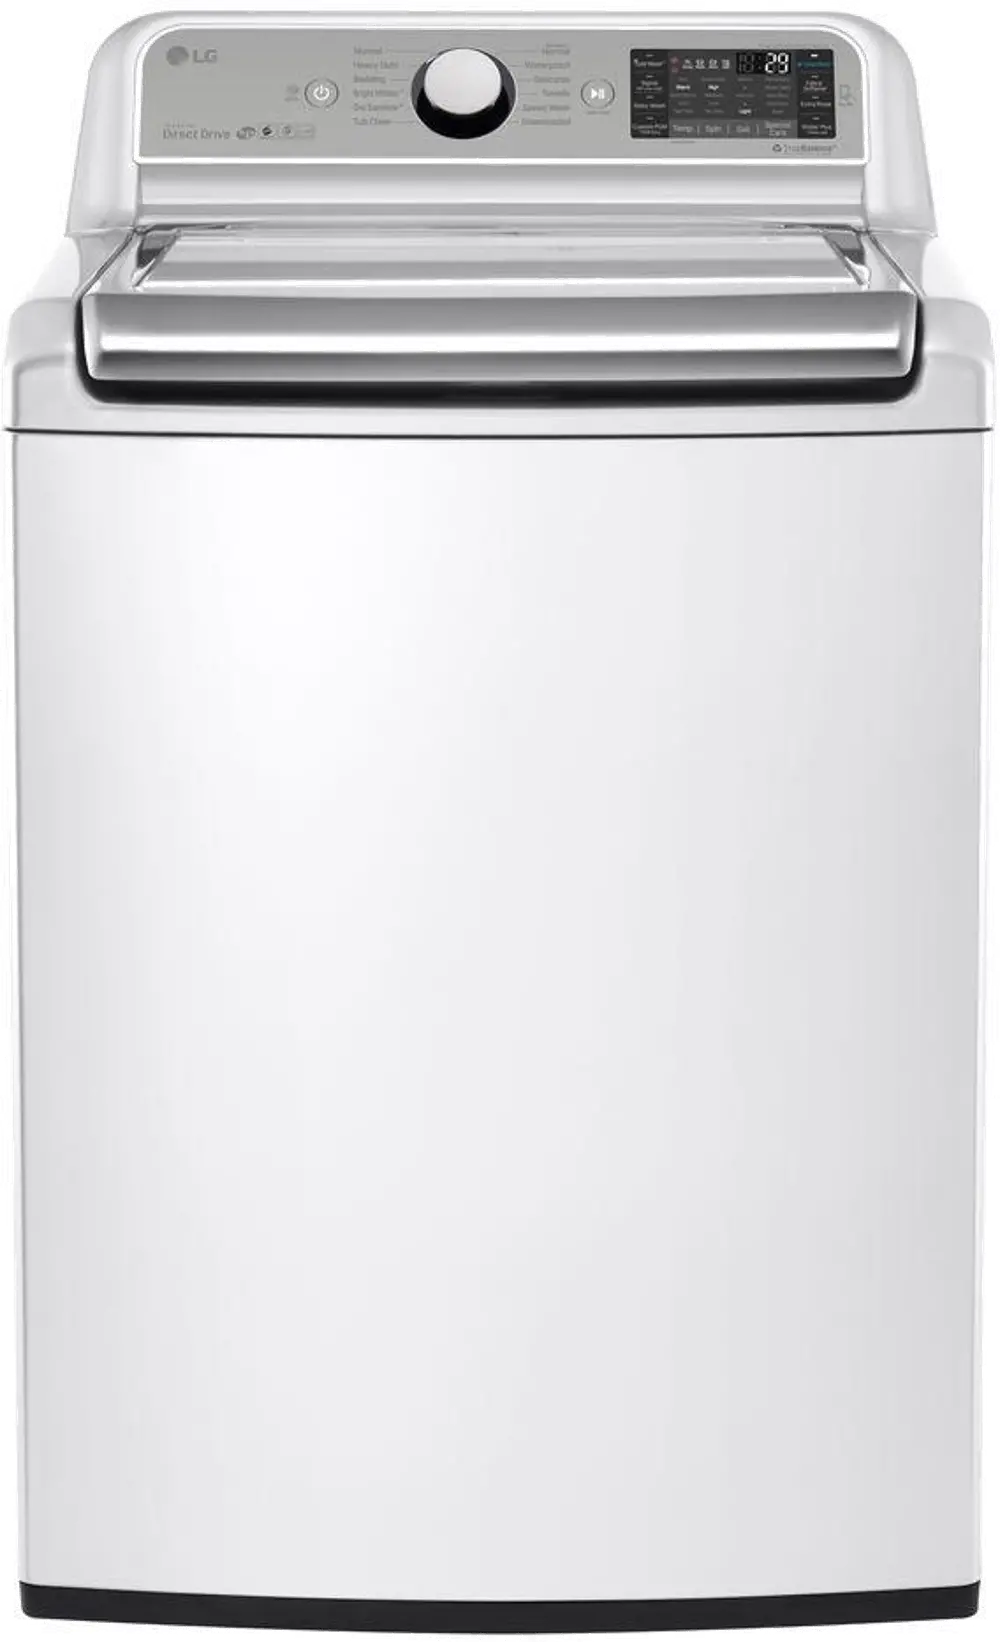 WT7500CW LG White 5.2 cu. ft. Top Load Washer-1